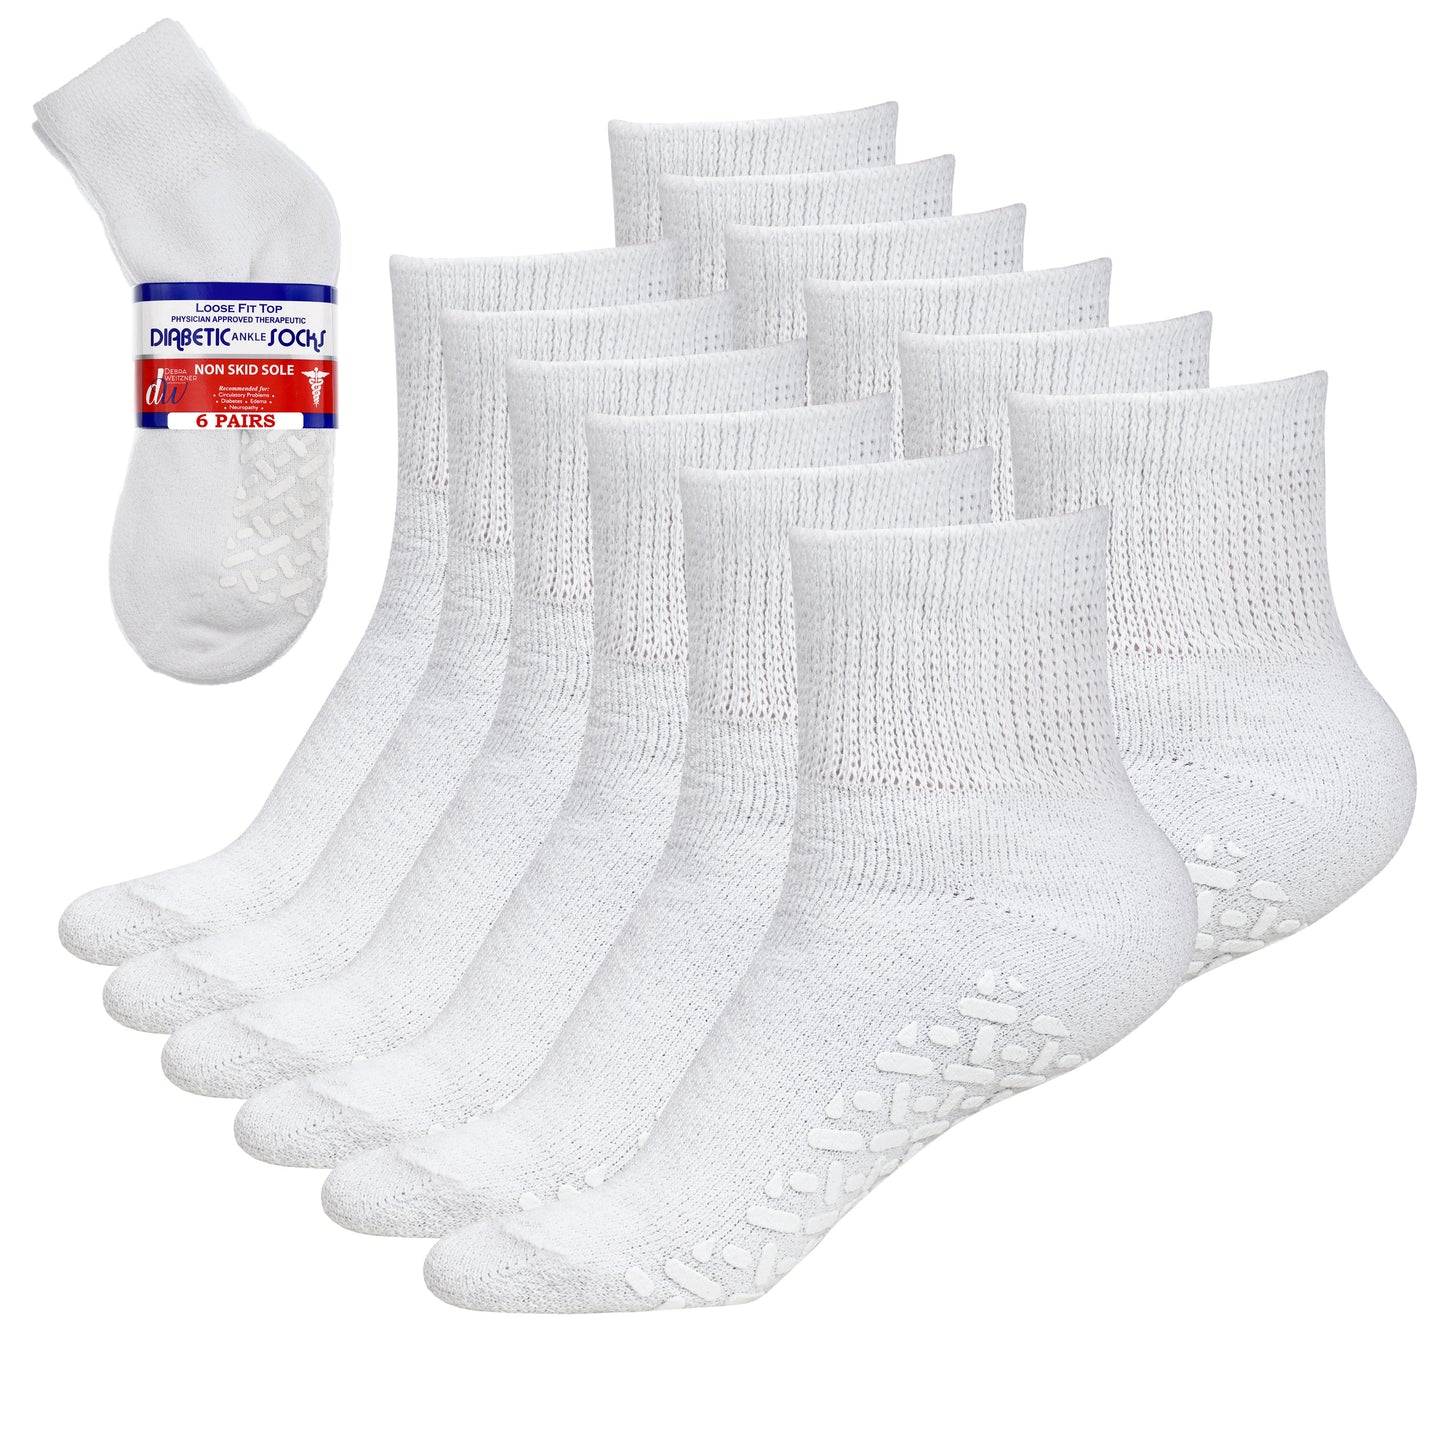 Diabetic Socks with Grips- Non Slip for Men and Women - 6 Pairs